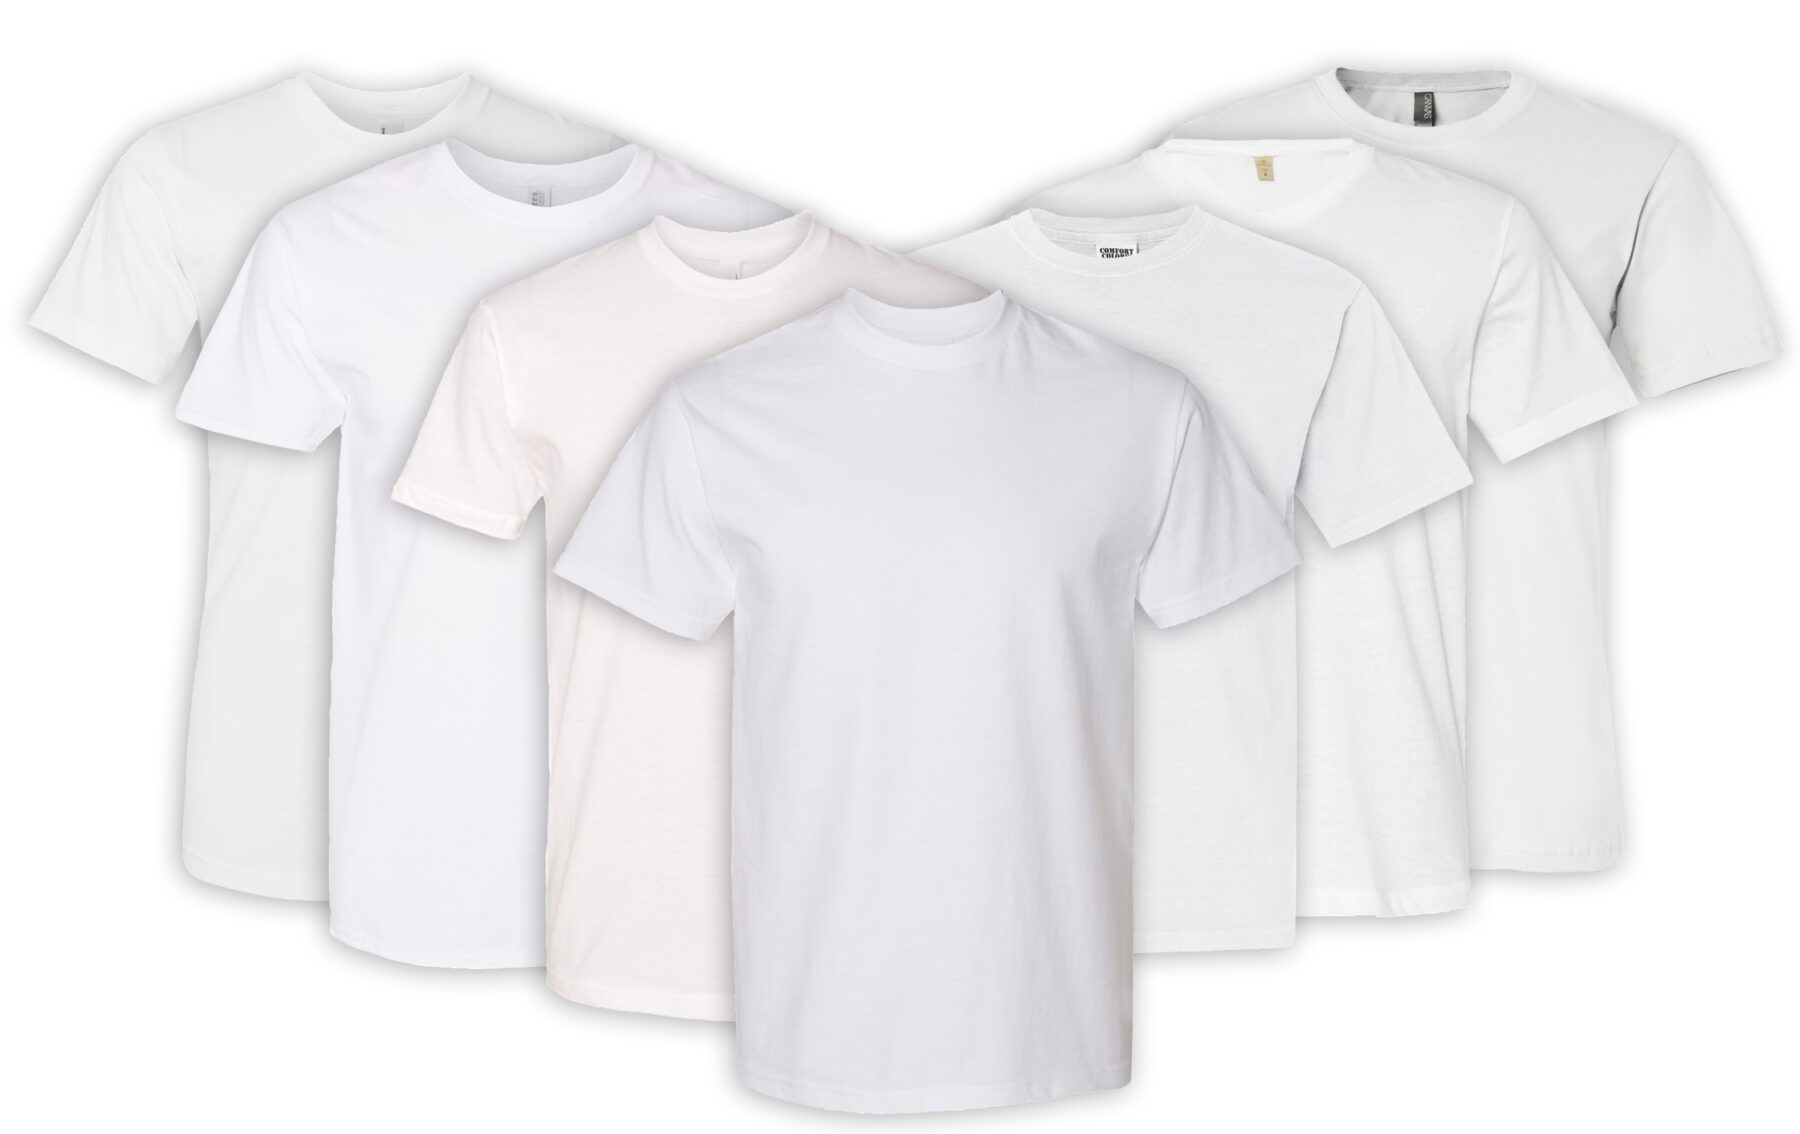 GET YOUR HANDS ON SOME PREMIUM HEAVYWEIGHT BLANK T SHIRTS FOR YOUR  STREETWEAR BRAND! 